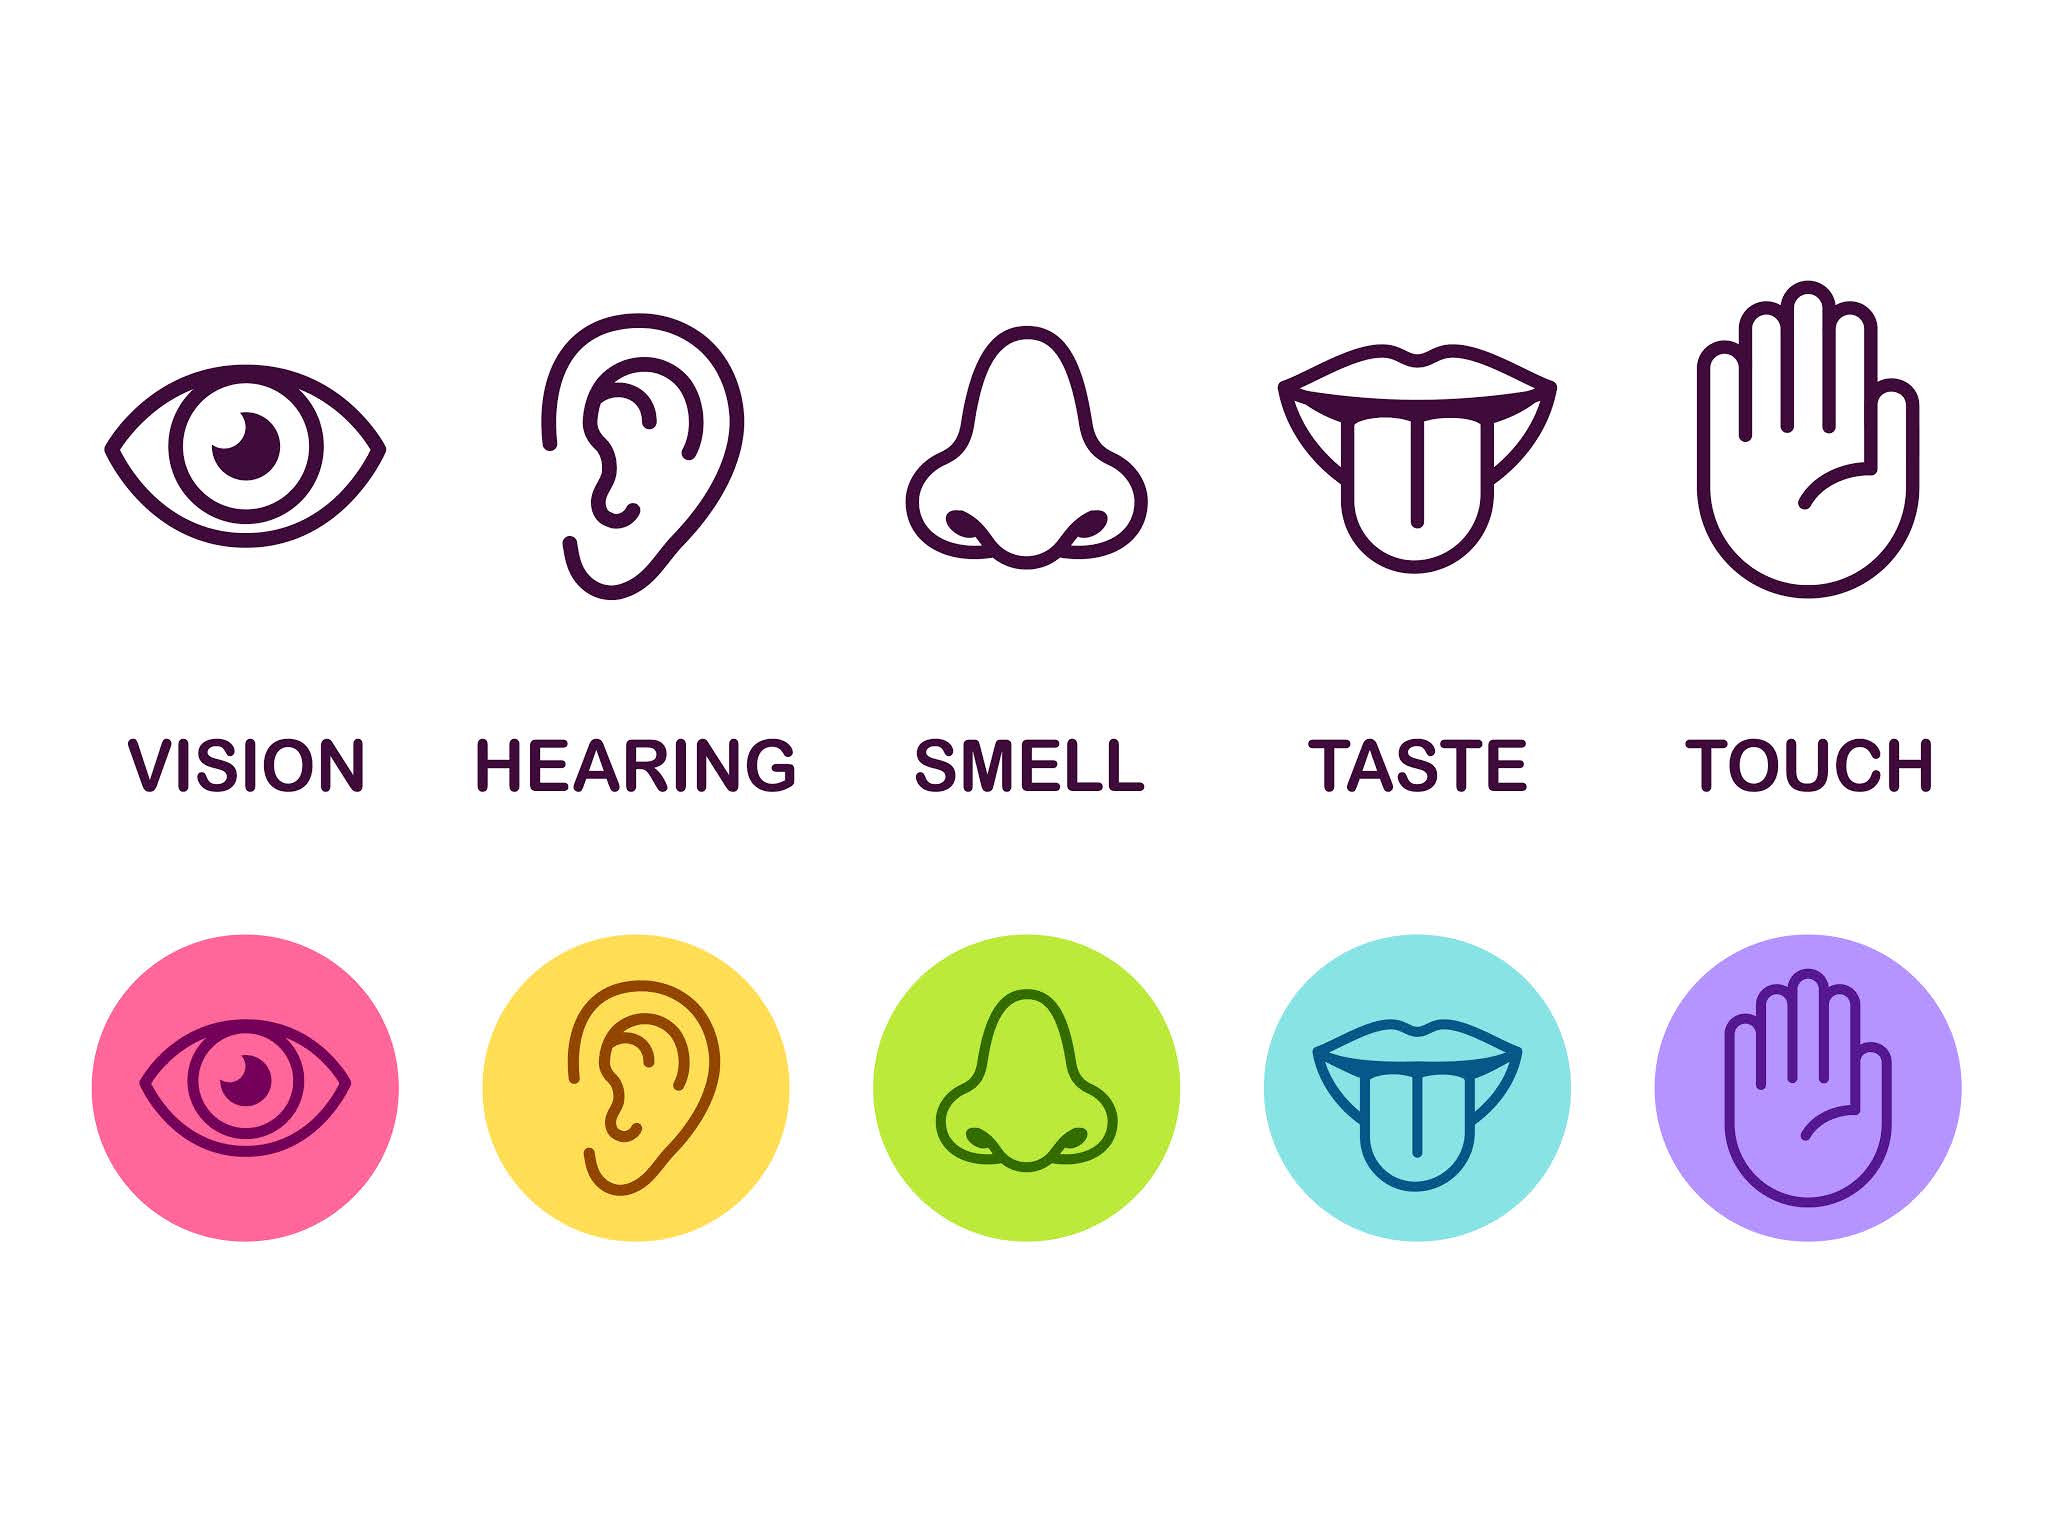 These describe the properties of a substance through the five senses: Hearing, smelling, seeing, touching and hearing.